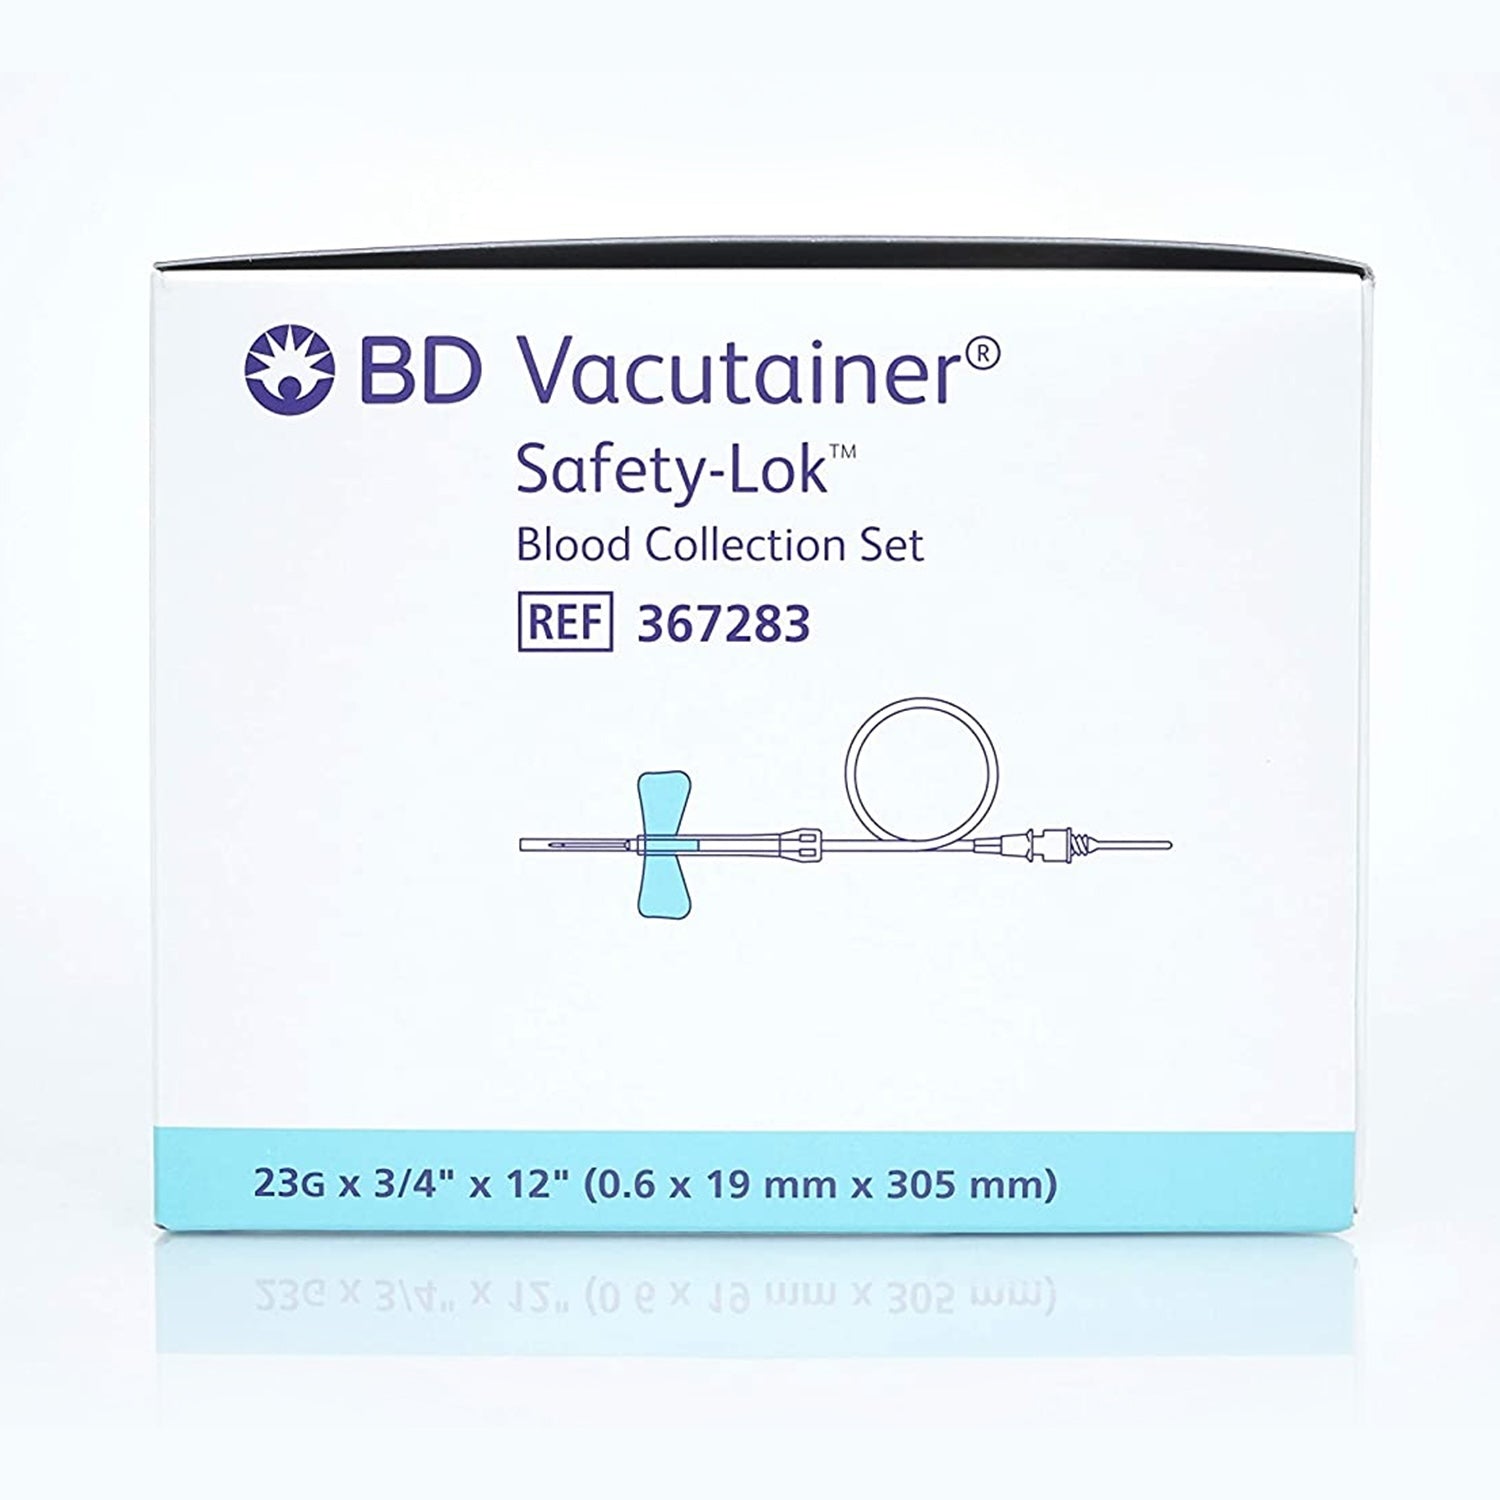 BD Vacutainer Safety Lok Blood Collection System | 0.75" Needle | 23G x 12" Tubing | Pack of 50 (1)